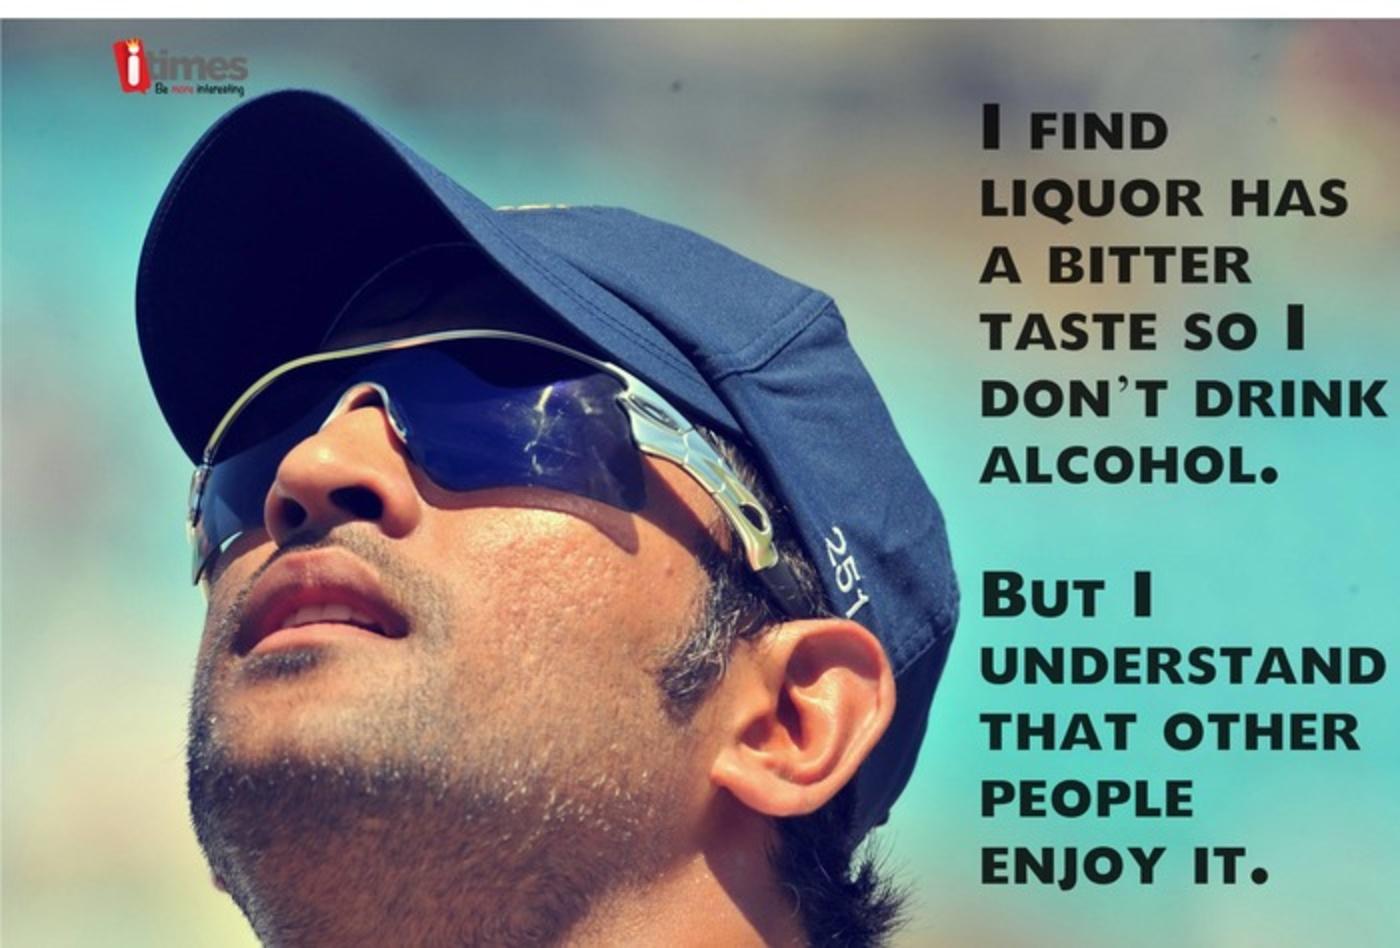 MS Dhoni's Most Awe Inspiring Quotes Photo